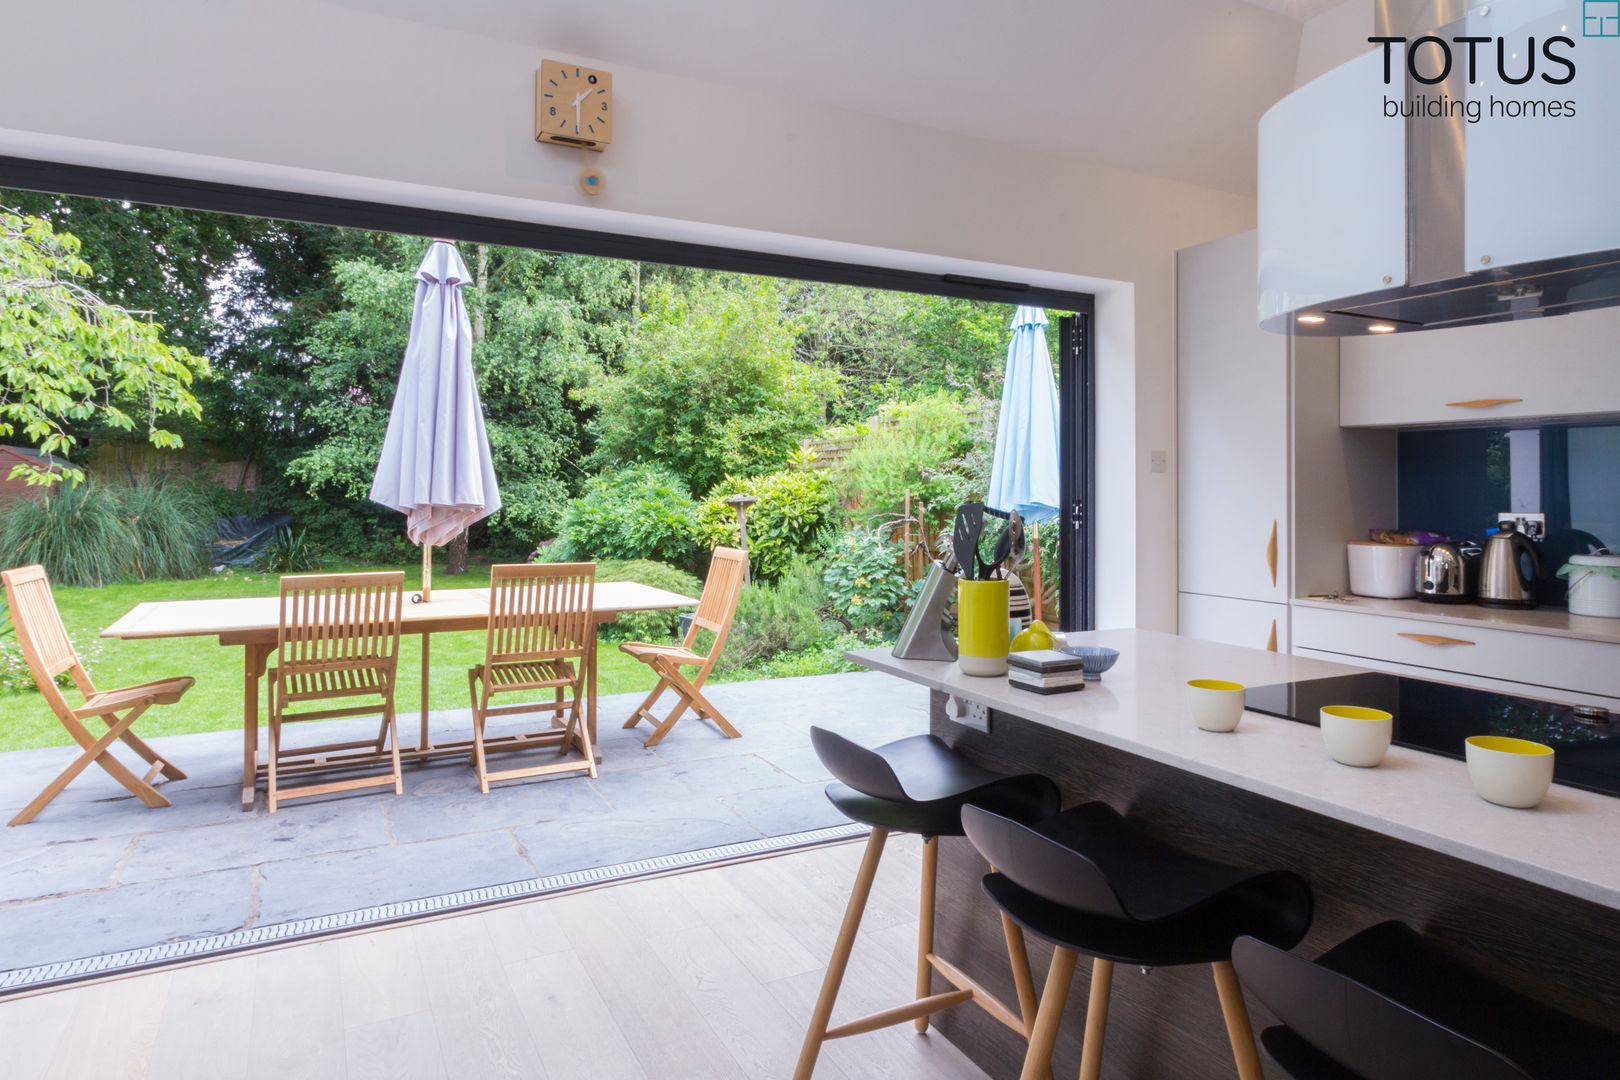 New life for a 1920s home - extension and full renovation, Thames Ditton, Surrey, TOTUS TOTUS Cucina moderna